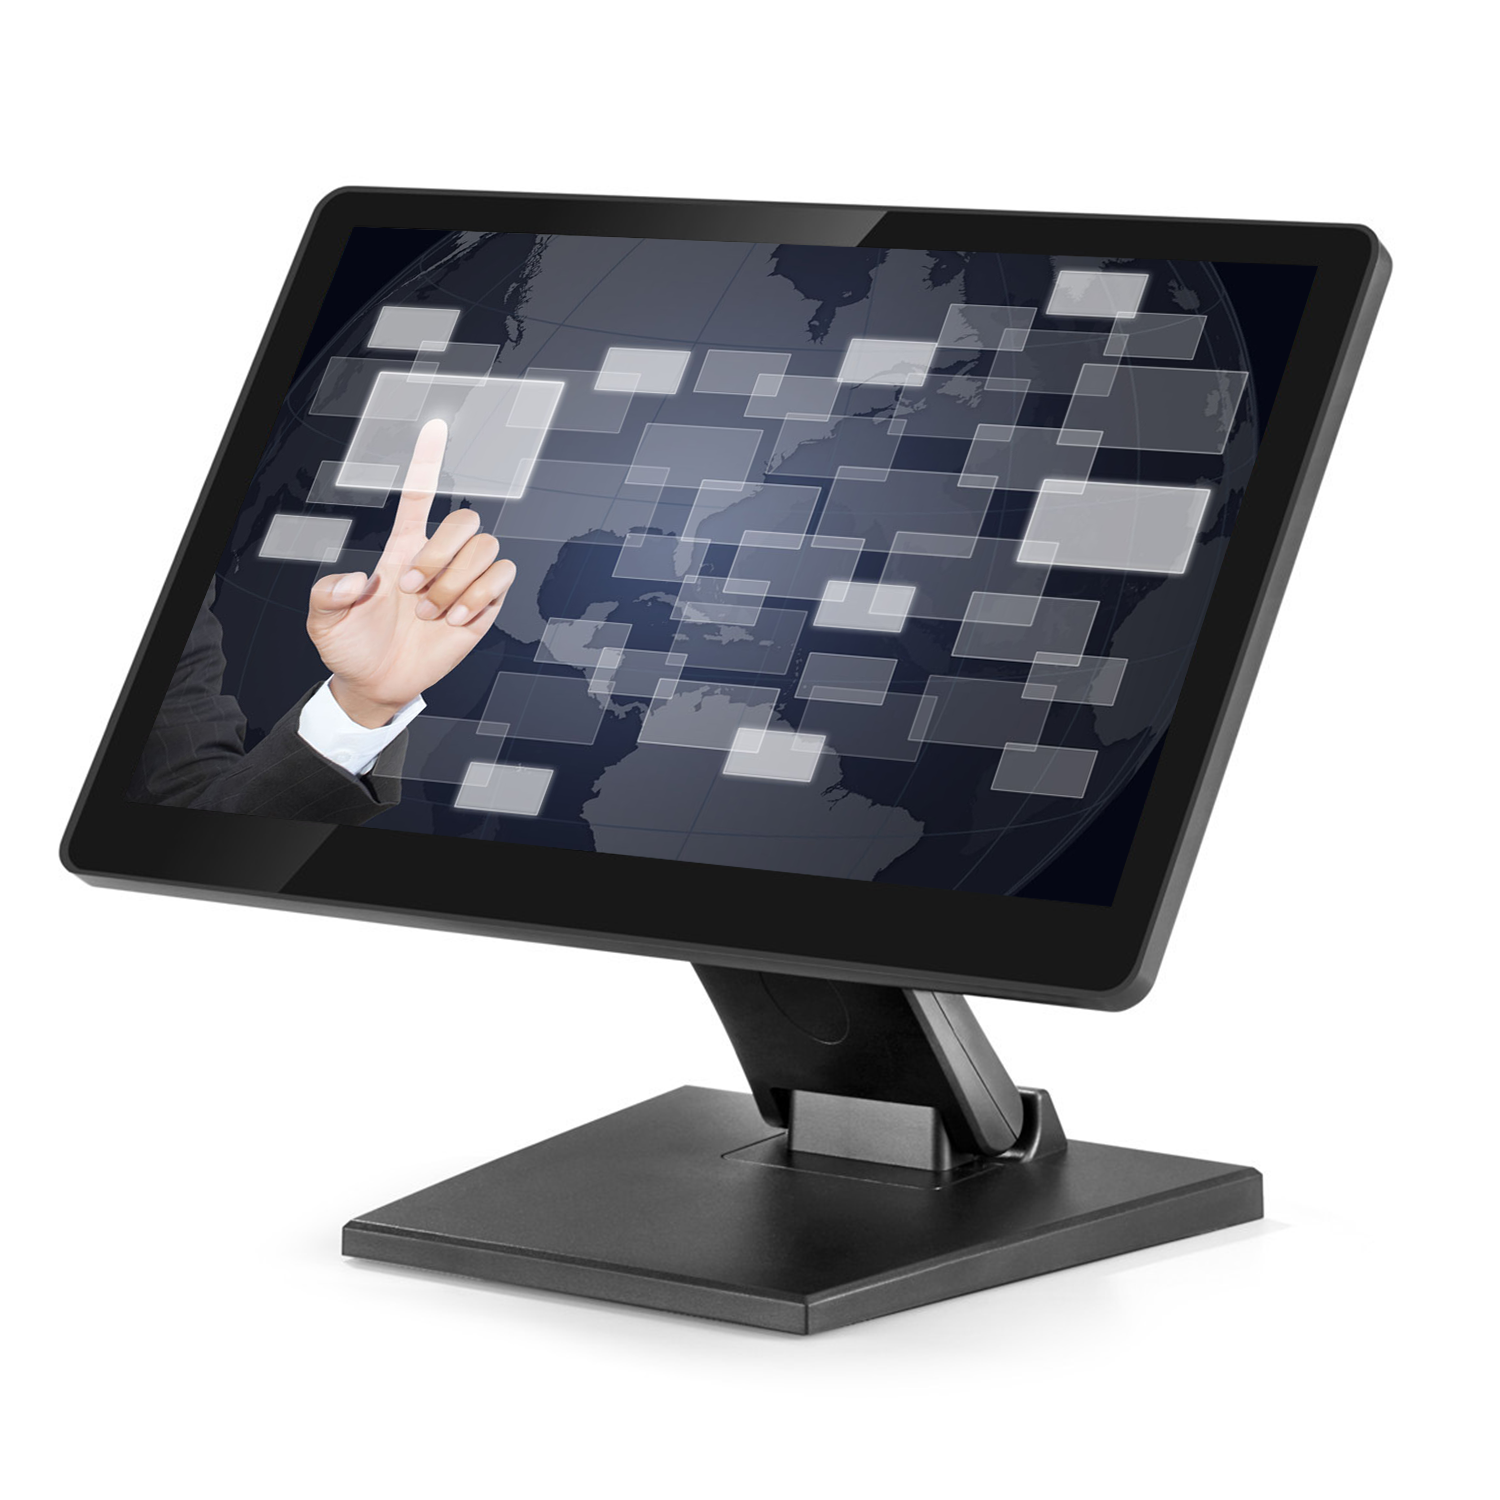 15.6 inch true flat panel touch screen monitor 